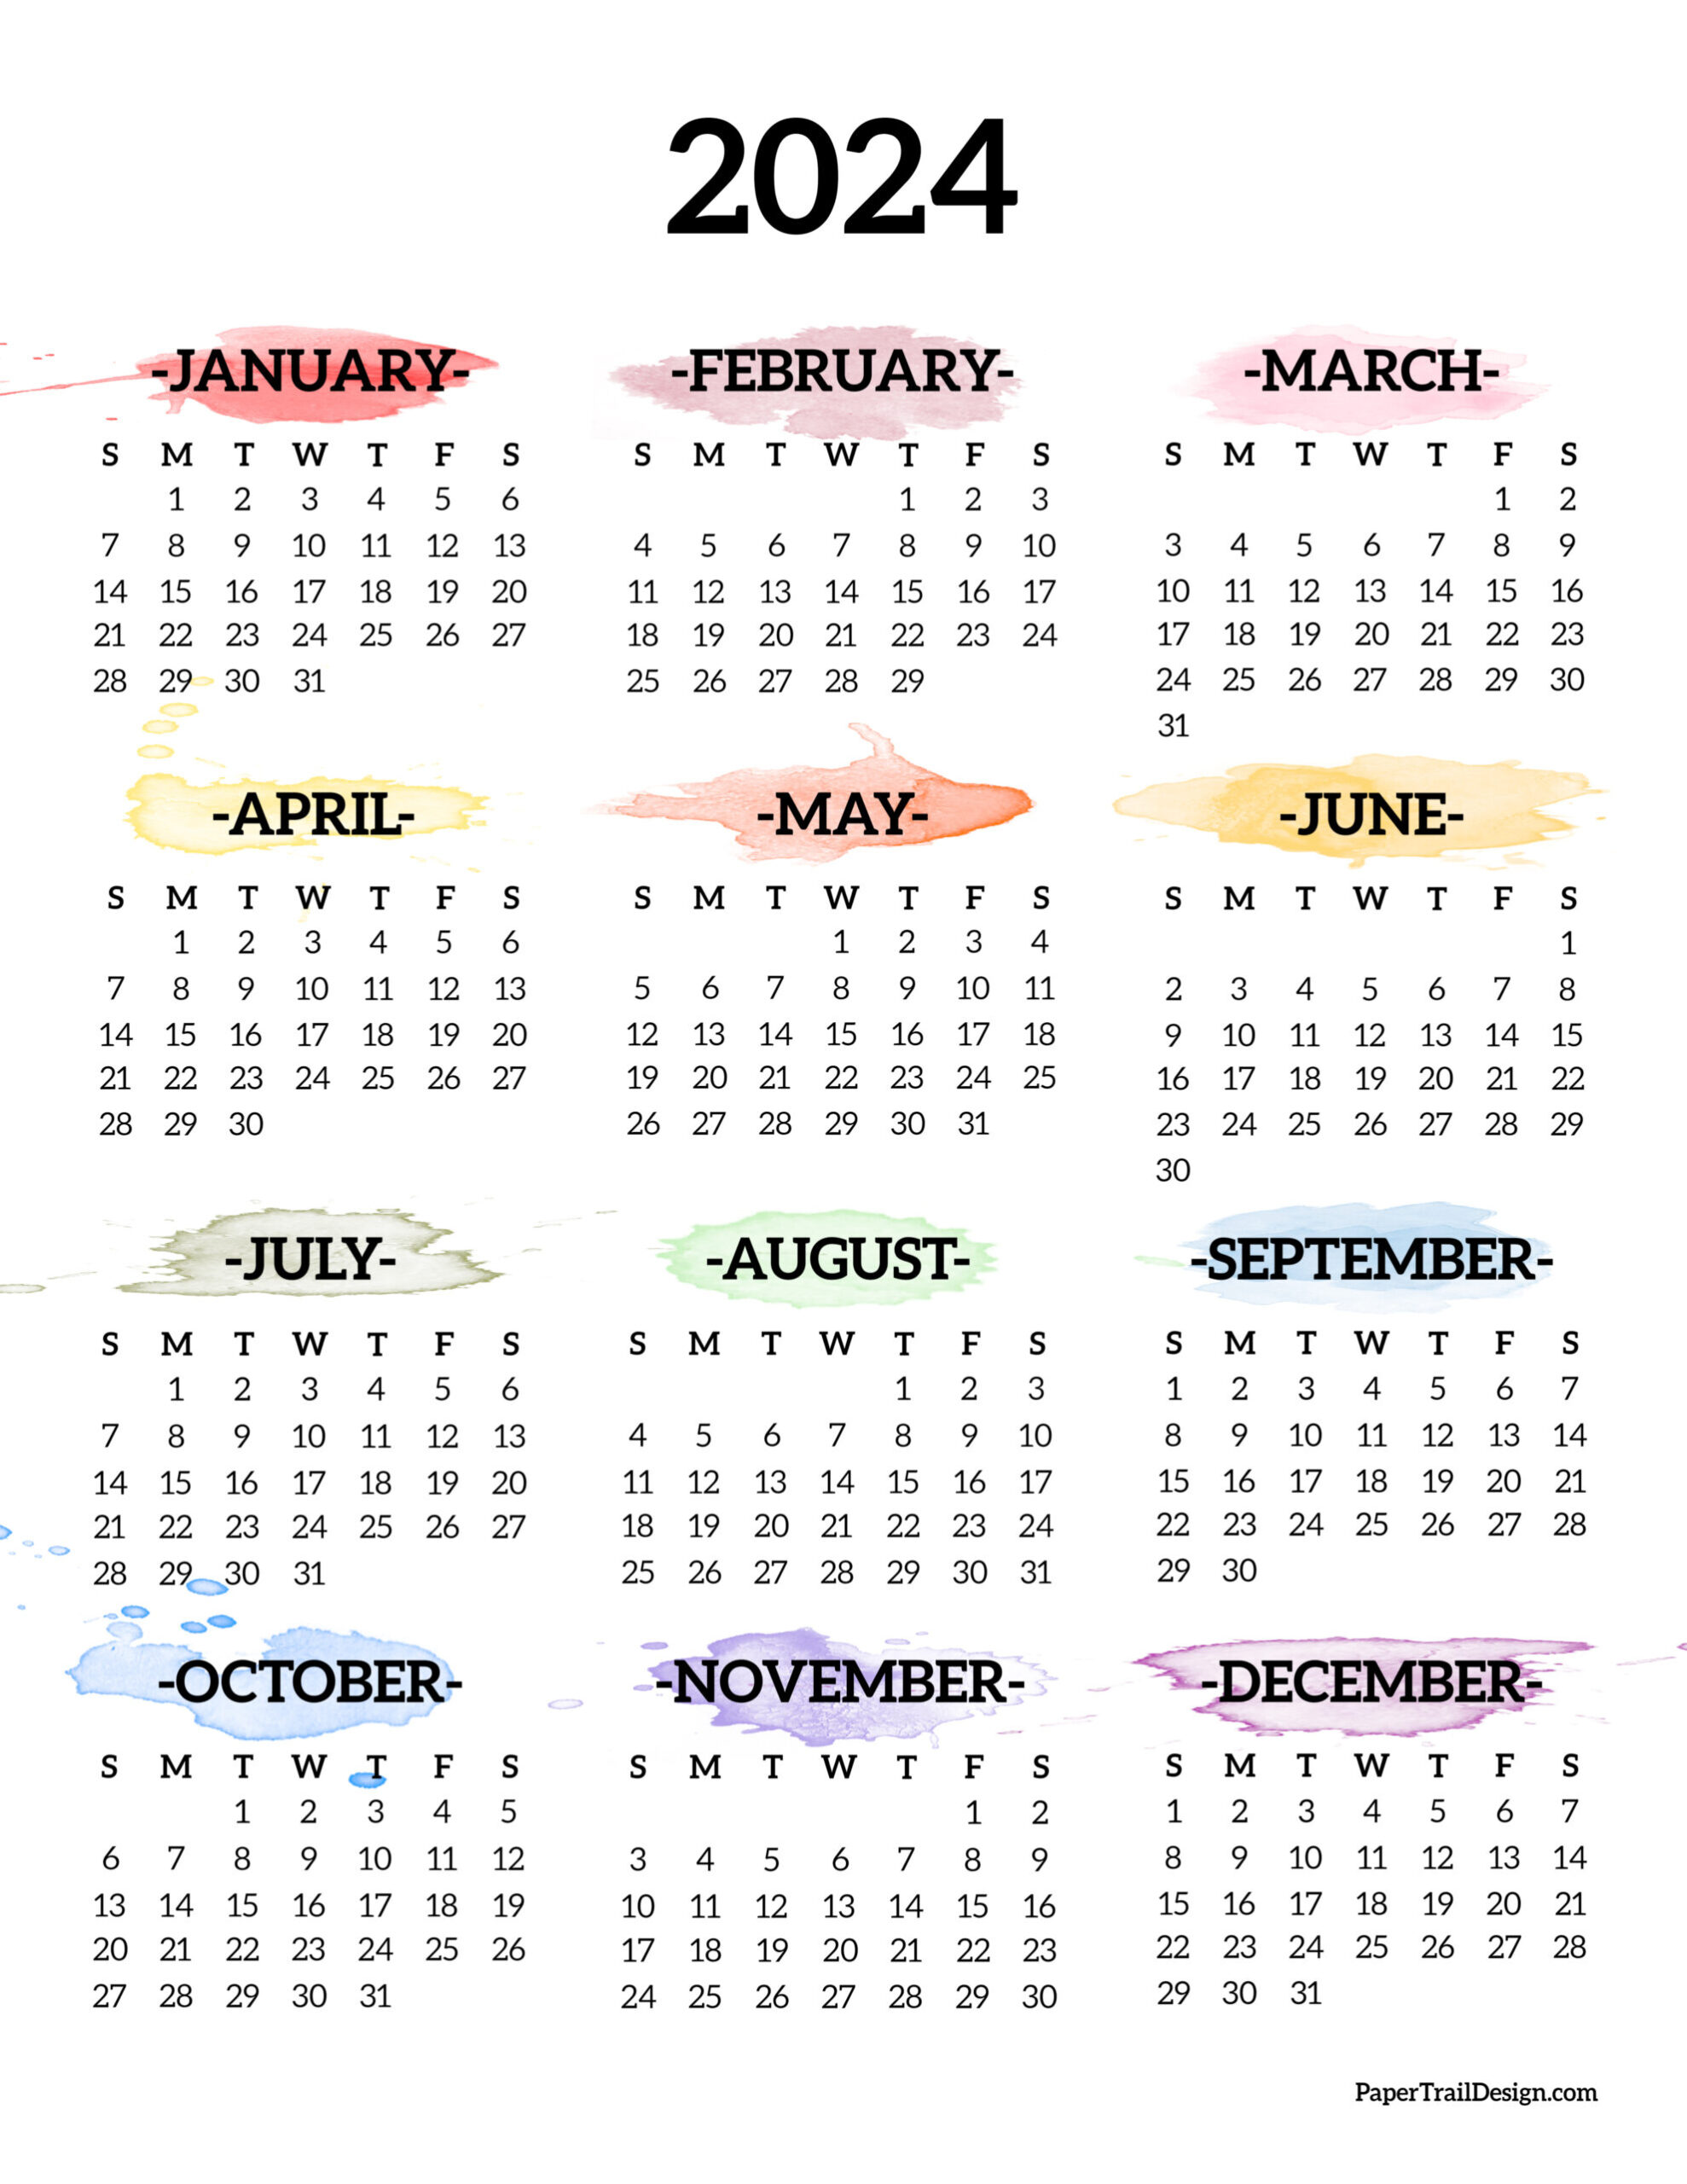 Calendar 2024 Printable One Page - Paper Trail Design | Year At A Glance Printable Calendar 2024